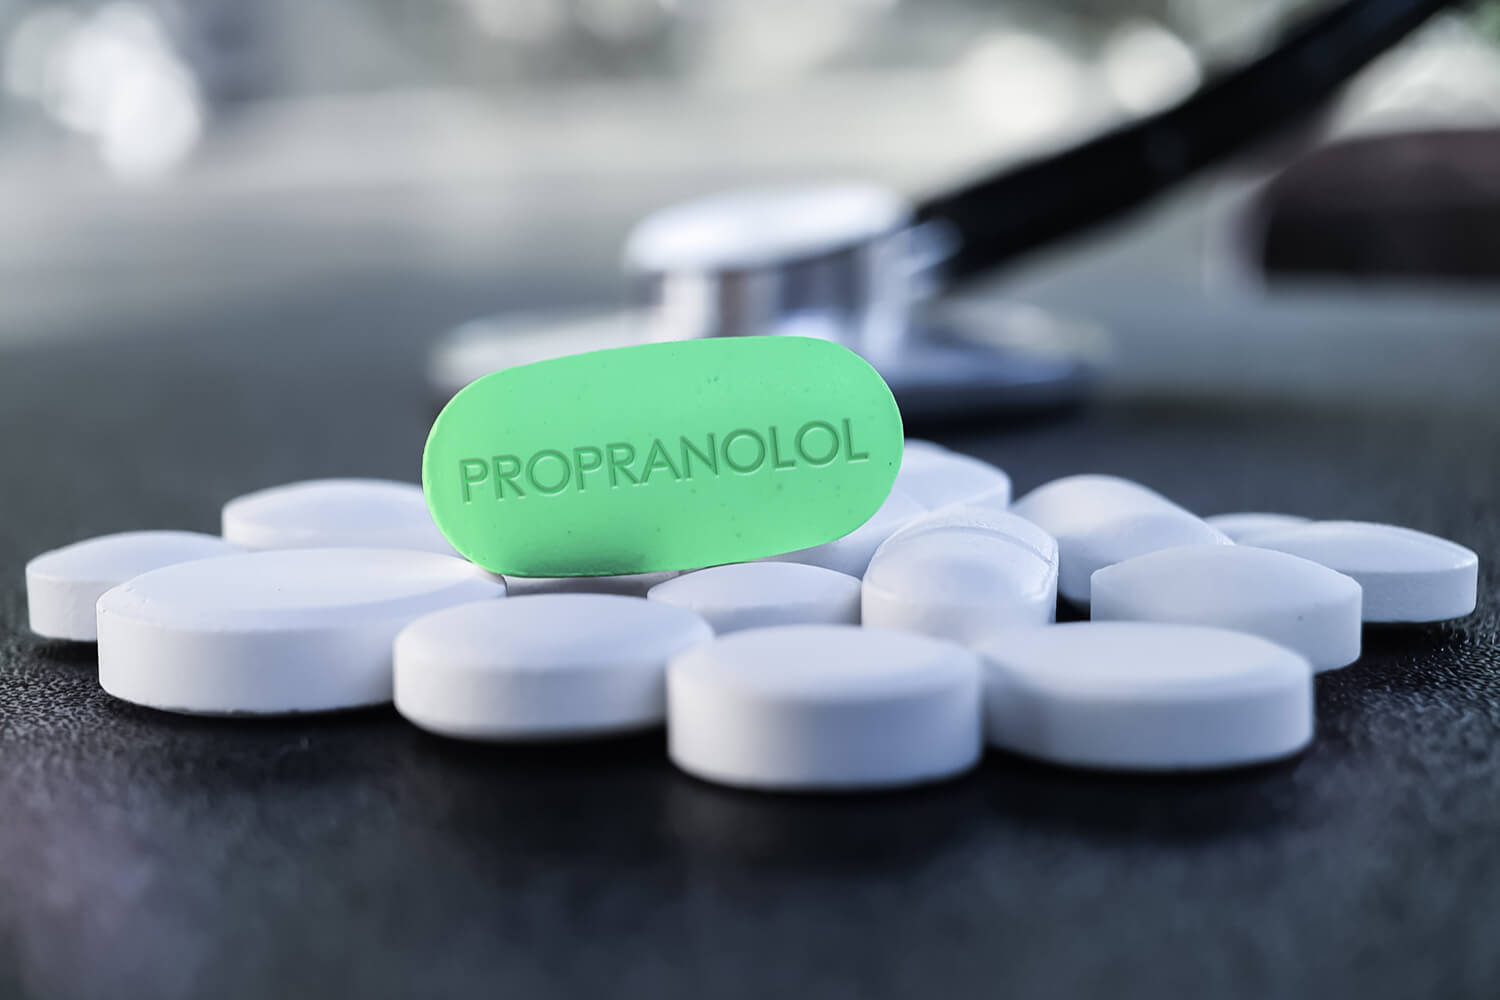 Propranolol During Pregnancy – Is It Safe?